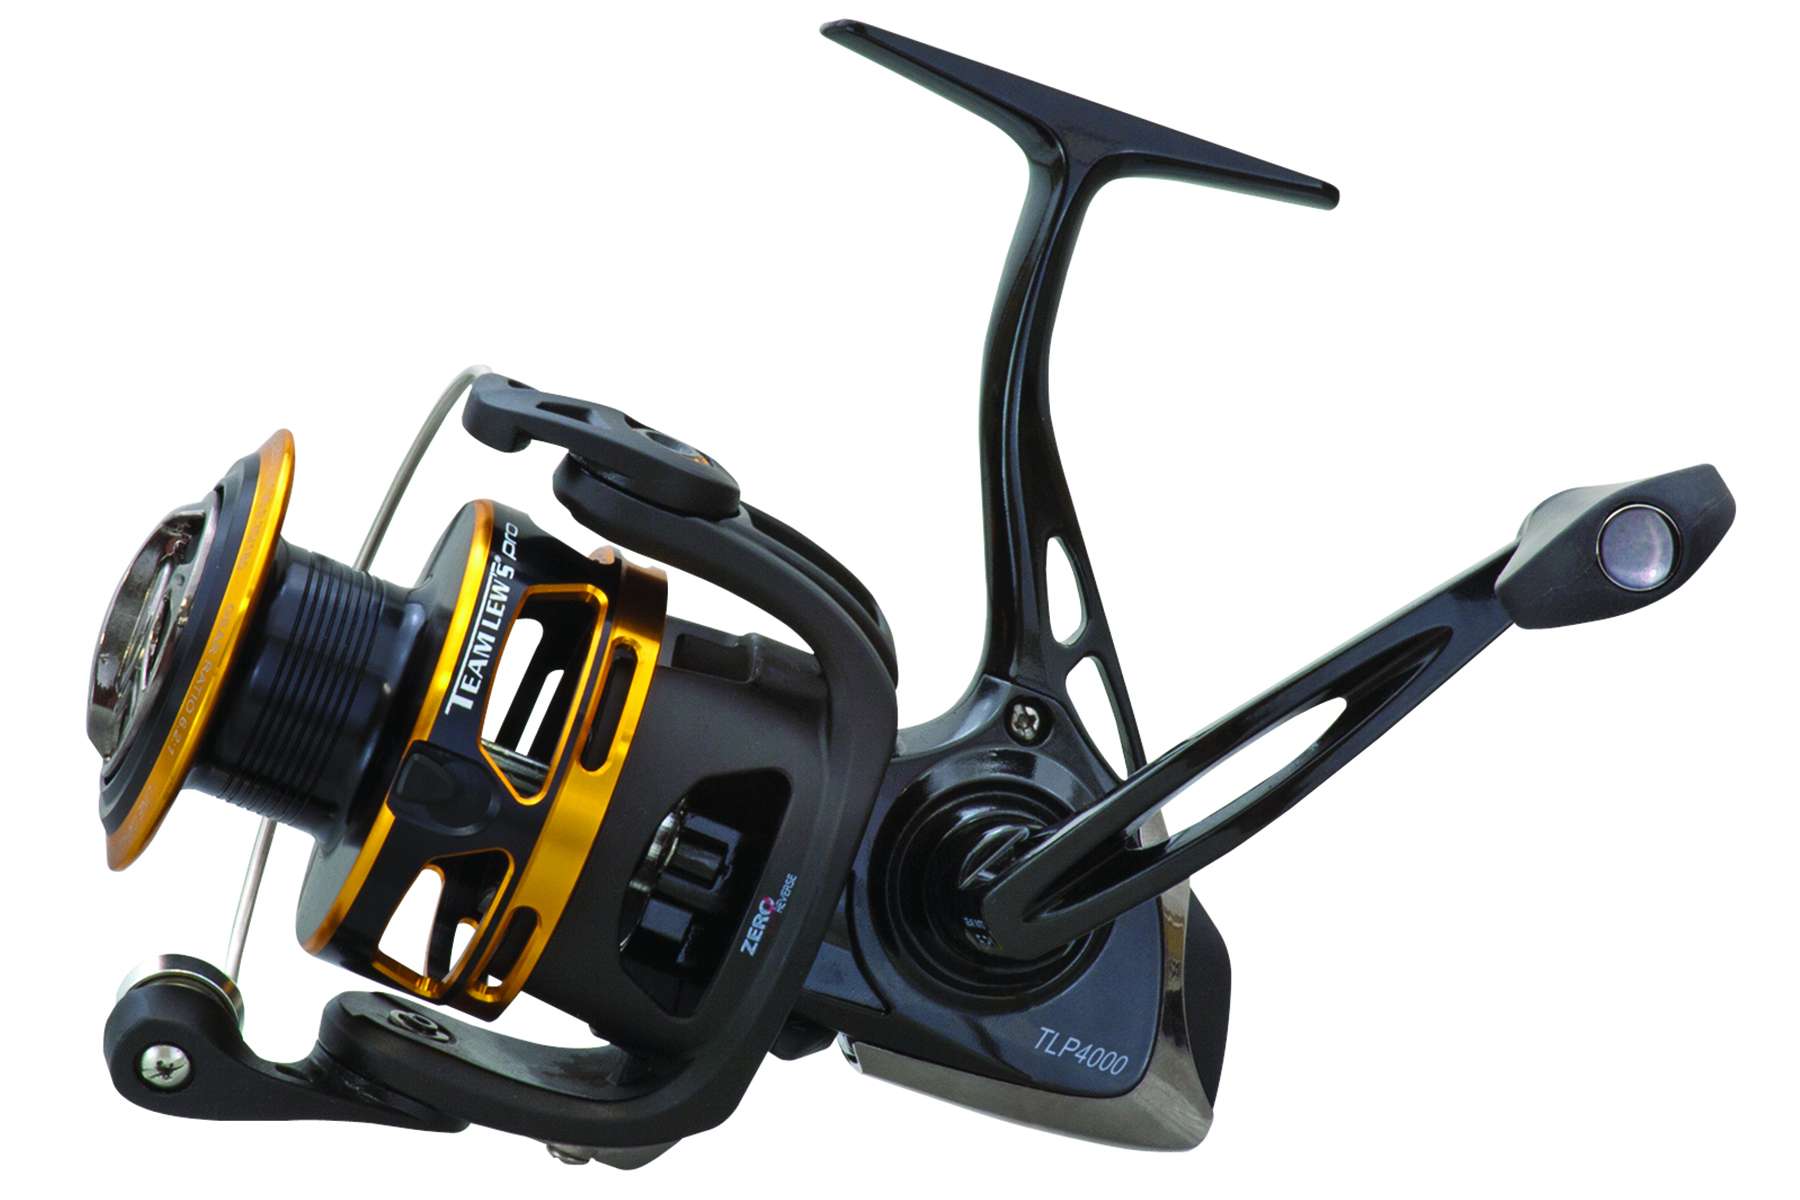 <b>Lew's</b><br>	Pro Speed Spin Spinning Reel<br>			The Pro Speed Spin features an aluminum body and sideplate, and a lightweight but strong carbon C60 skeletal rotor with stainless bail wire. The reelâs main shaft is stainless steel and pinion gearing is solid brass. Performance is super smooth with its premium 12 stainless steel bearing system. Drag performance is smooth too, thanks to a sealed Carbon Teflon multi-disc drag system.Four sizes available, from 1000 to 4000.